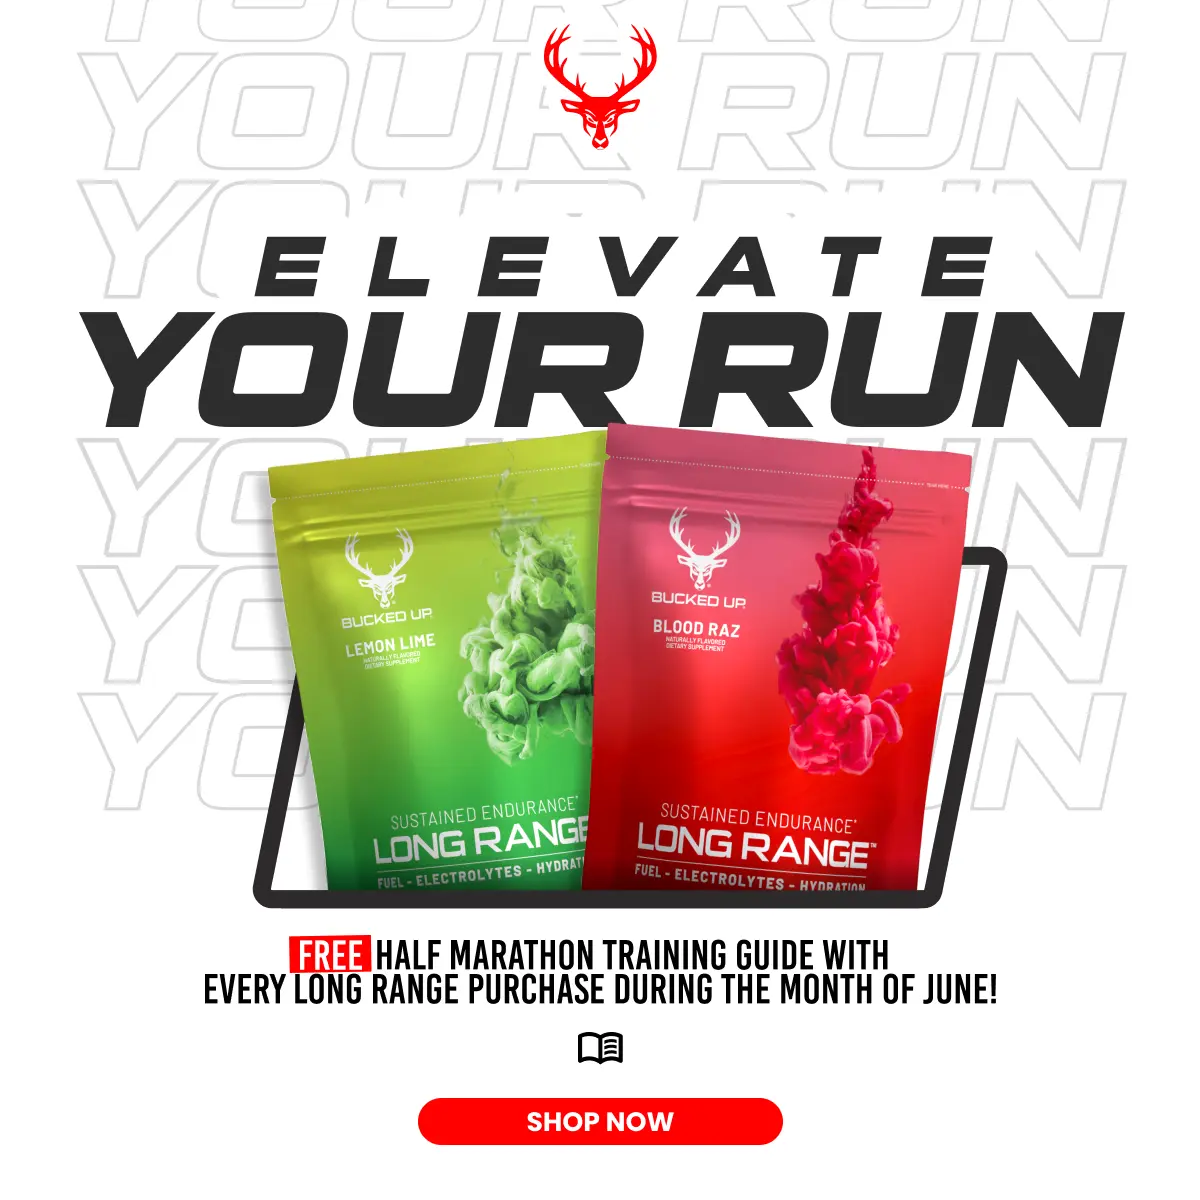 Long Range Promo - Text reads, "elevate your run, free half marathon training guide with every long range purchase during the month of June!"  Button reads, "Shop Now."  Image of our two long range flavors, lemon-lime and blood raz.,